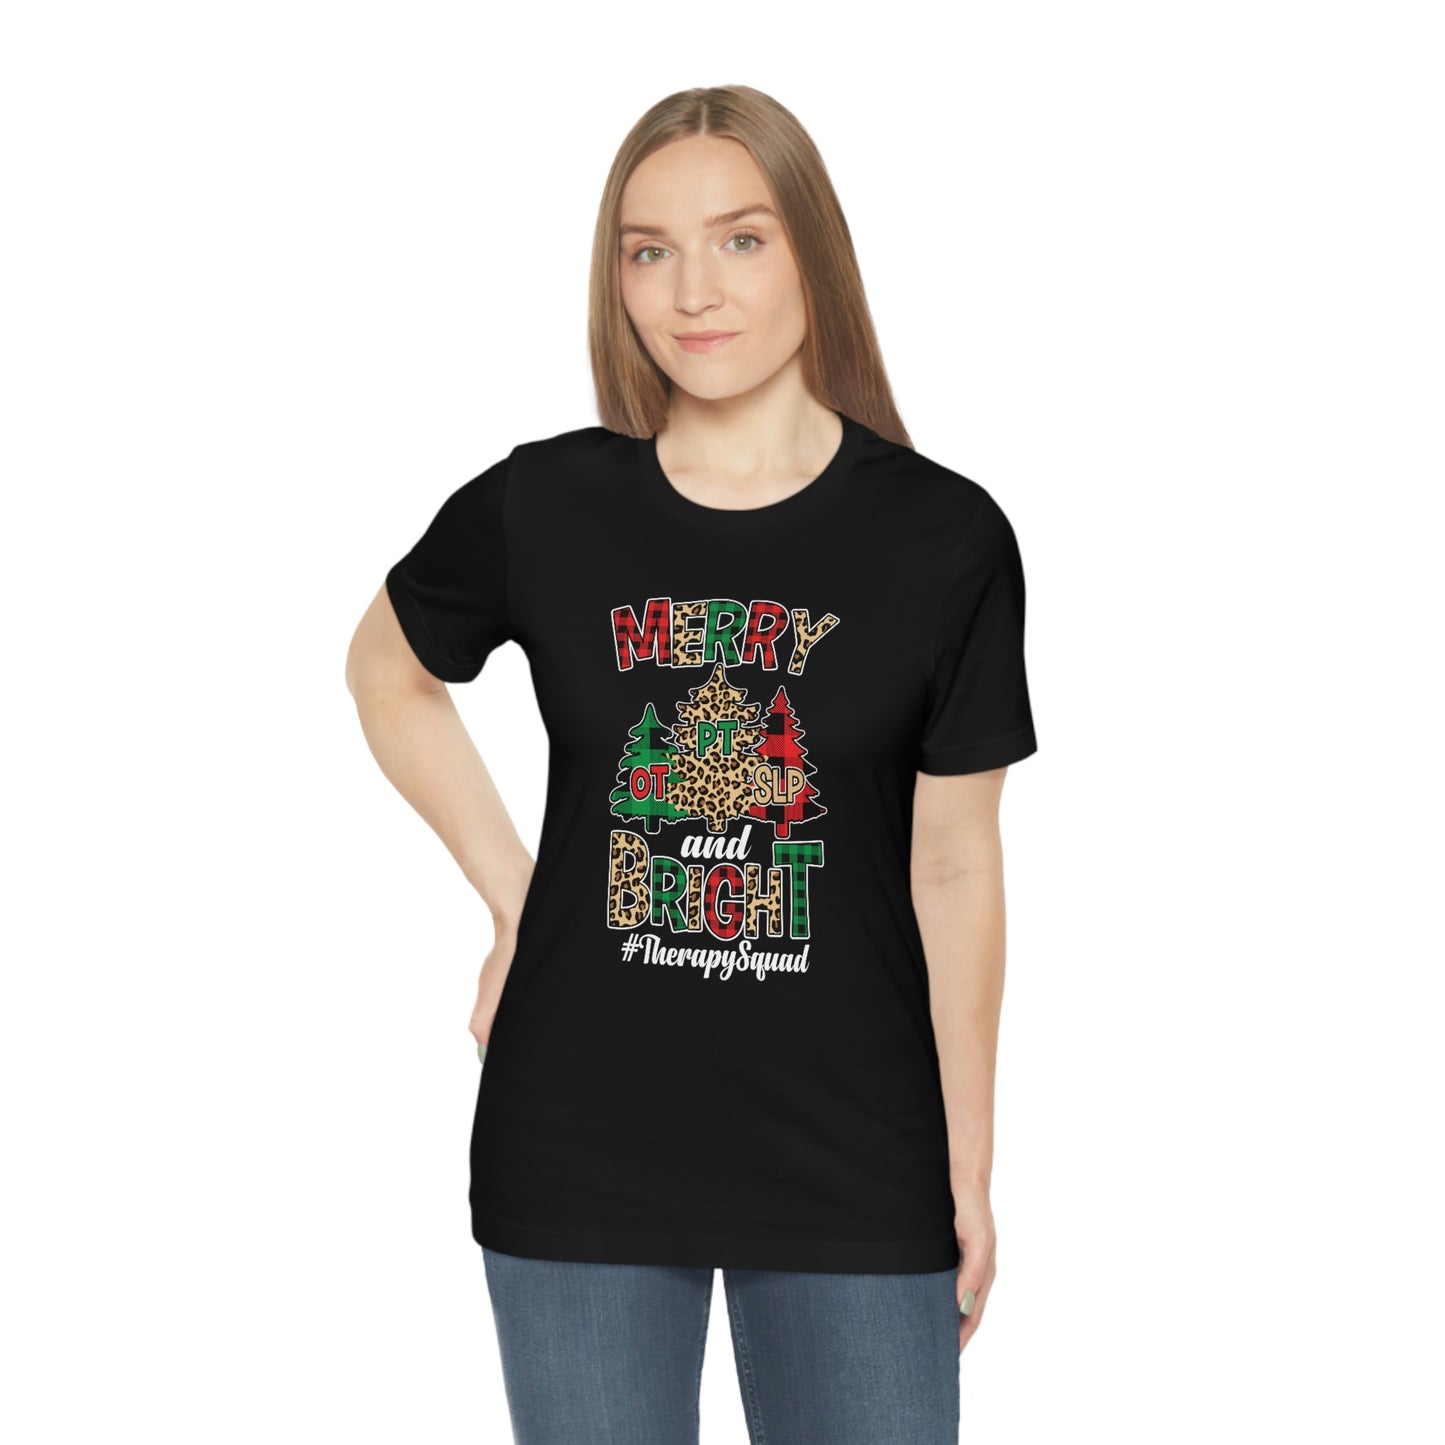 Merry And Bright Therapy Squad Shirt OT PT SLP